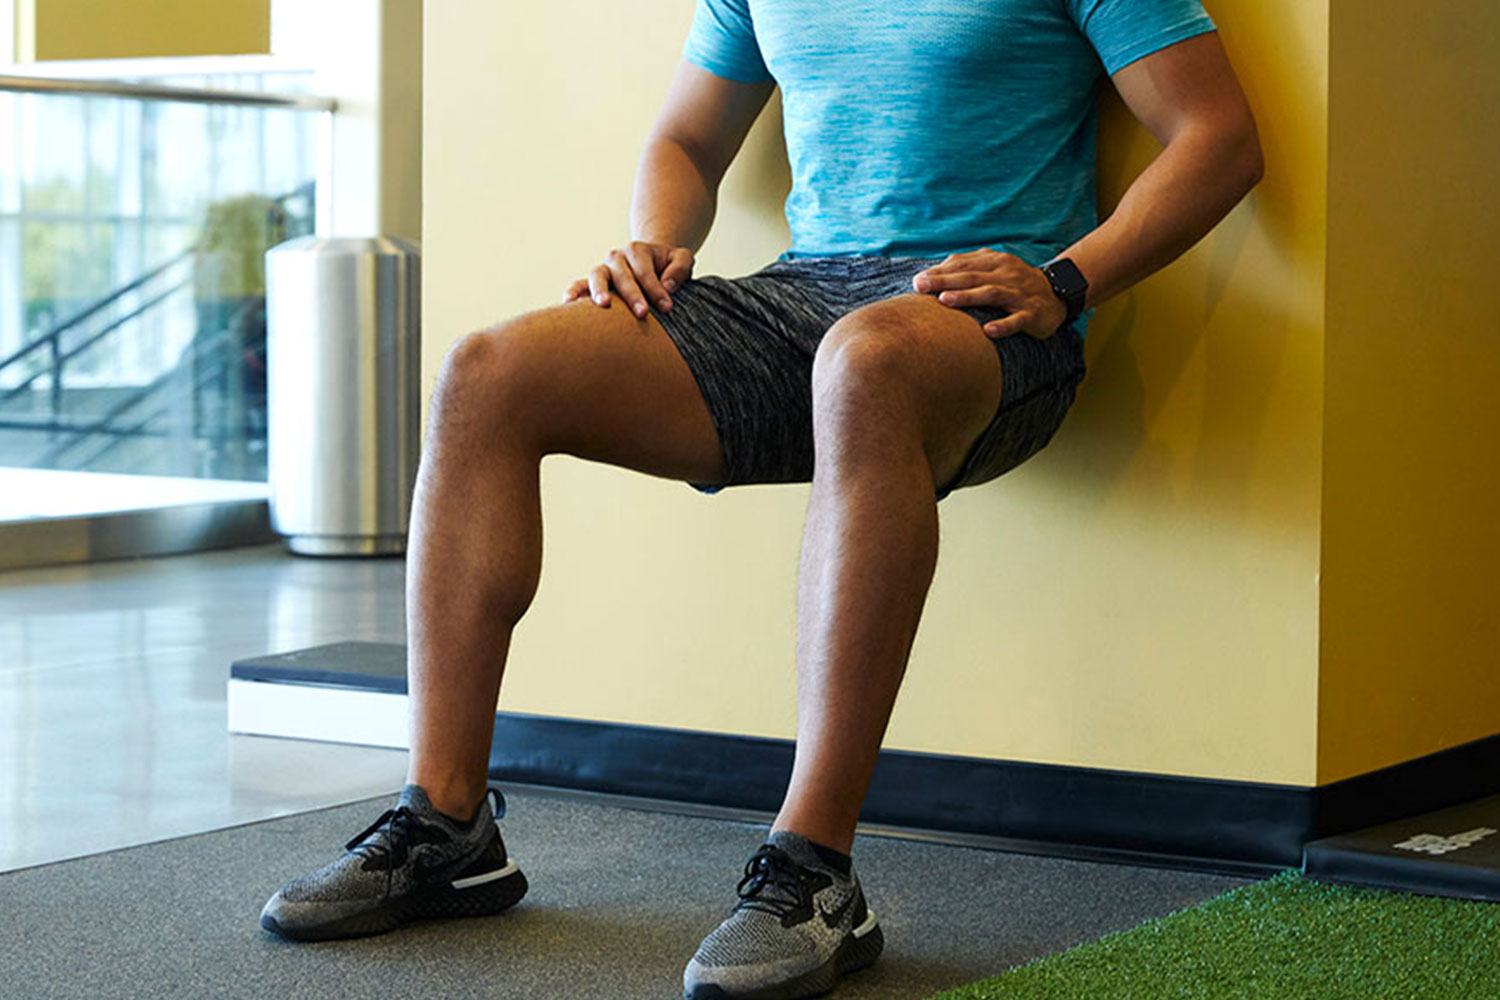 Try These Exercises to Build Strength for Sore Knees